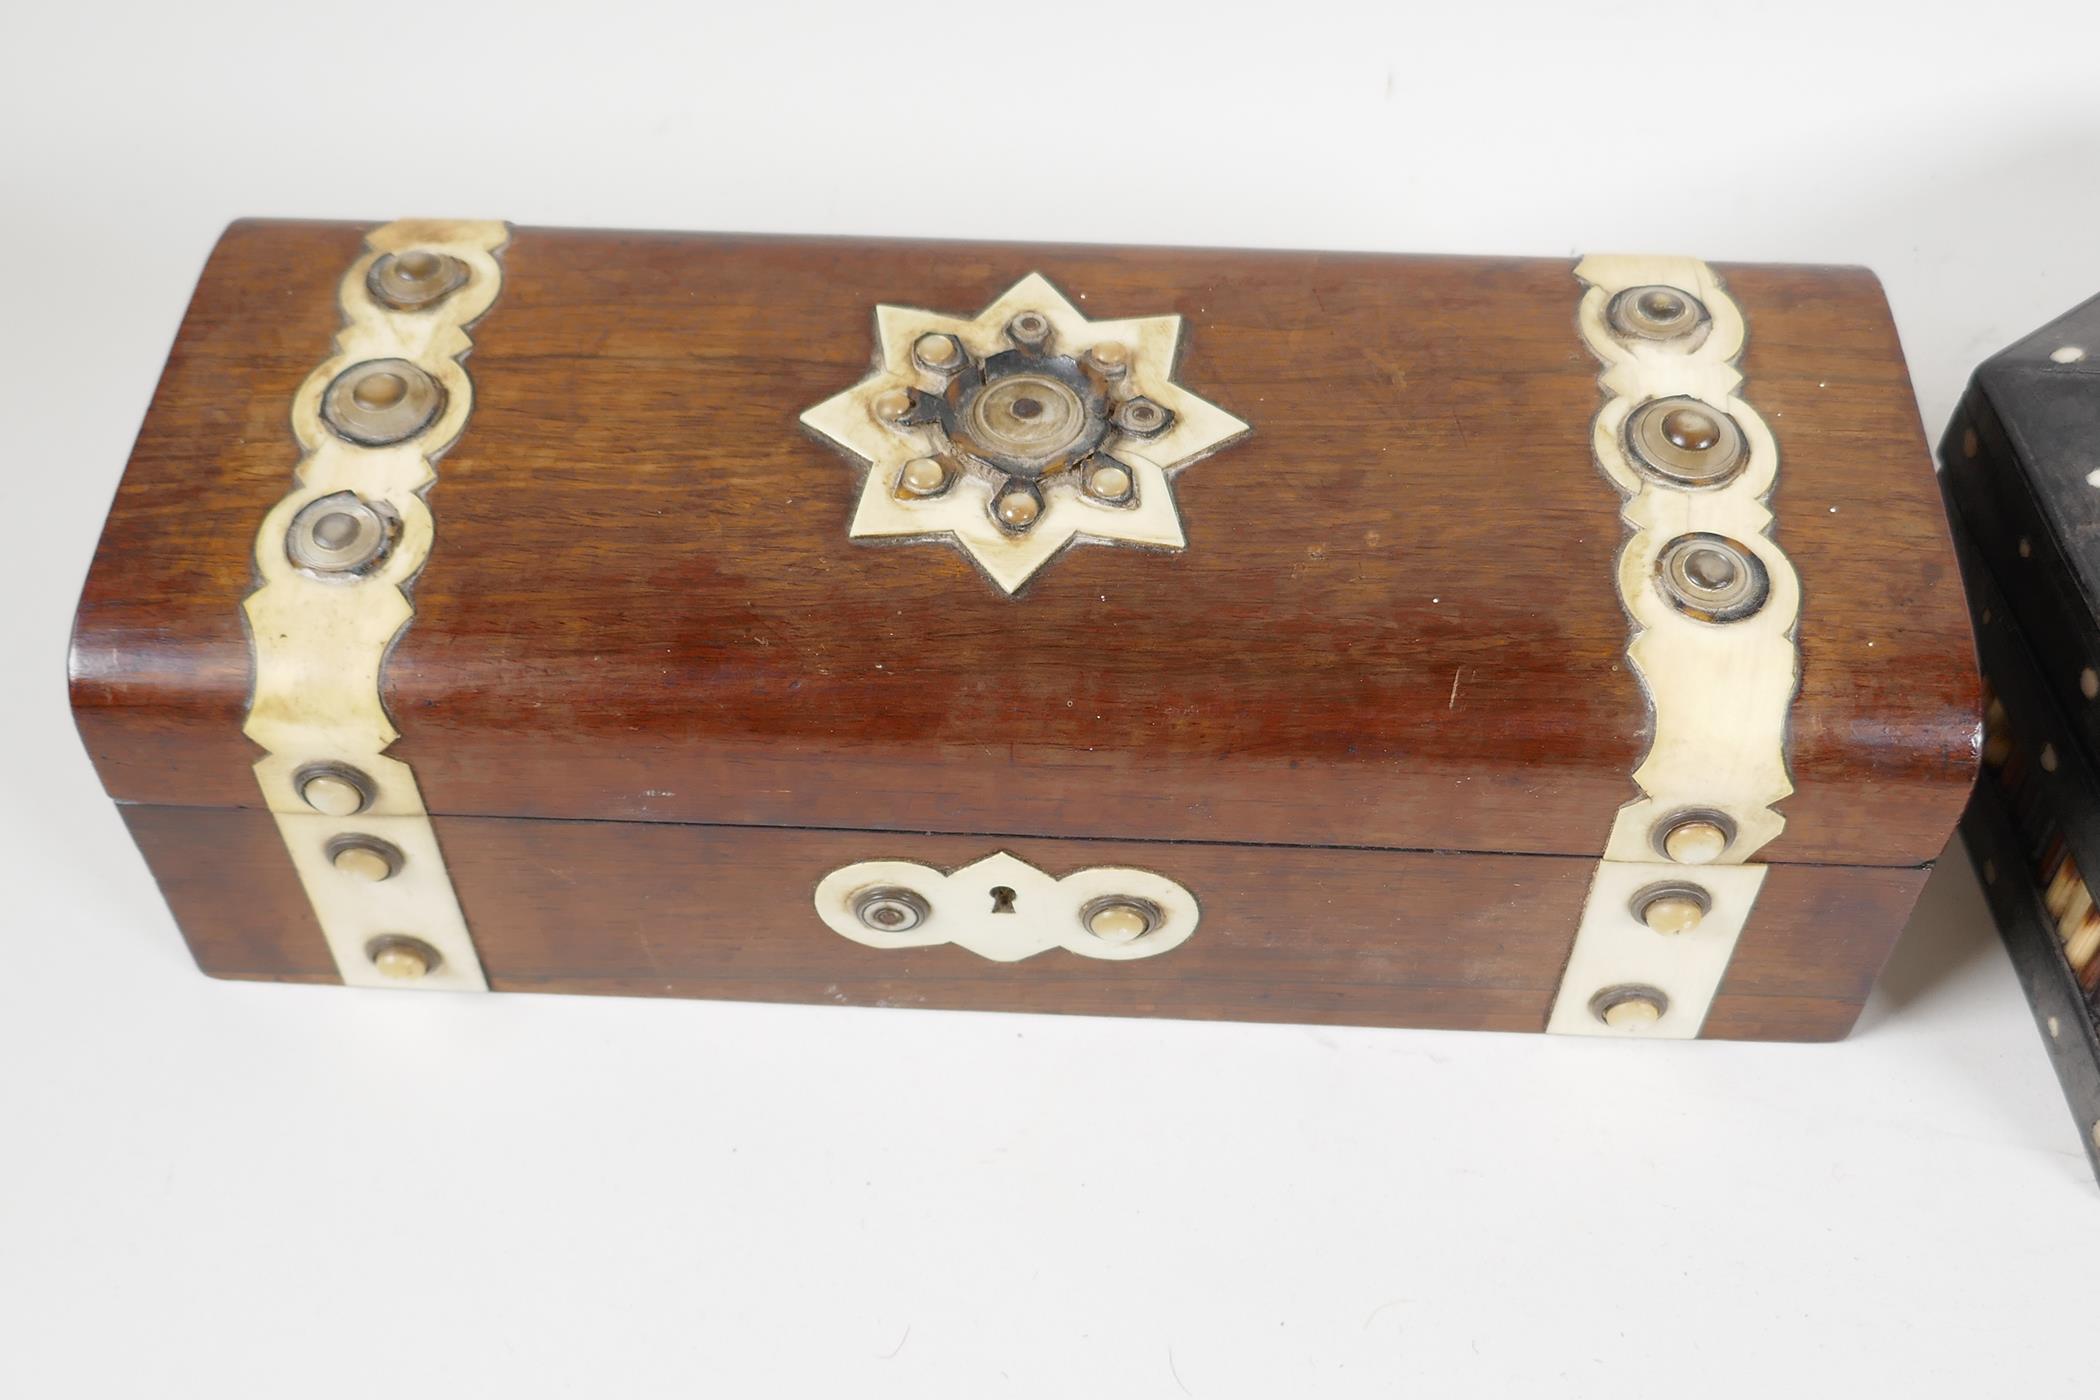 A C19th hexagonal quillwork trinket box, and a C19th rosewood glove box, with bone and mother of - Image 3 of 4